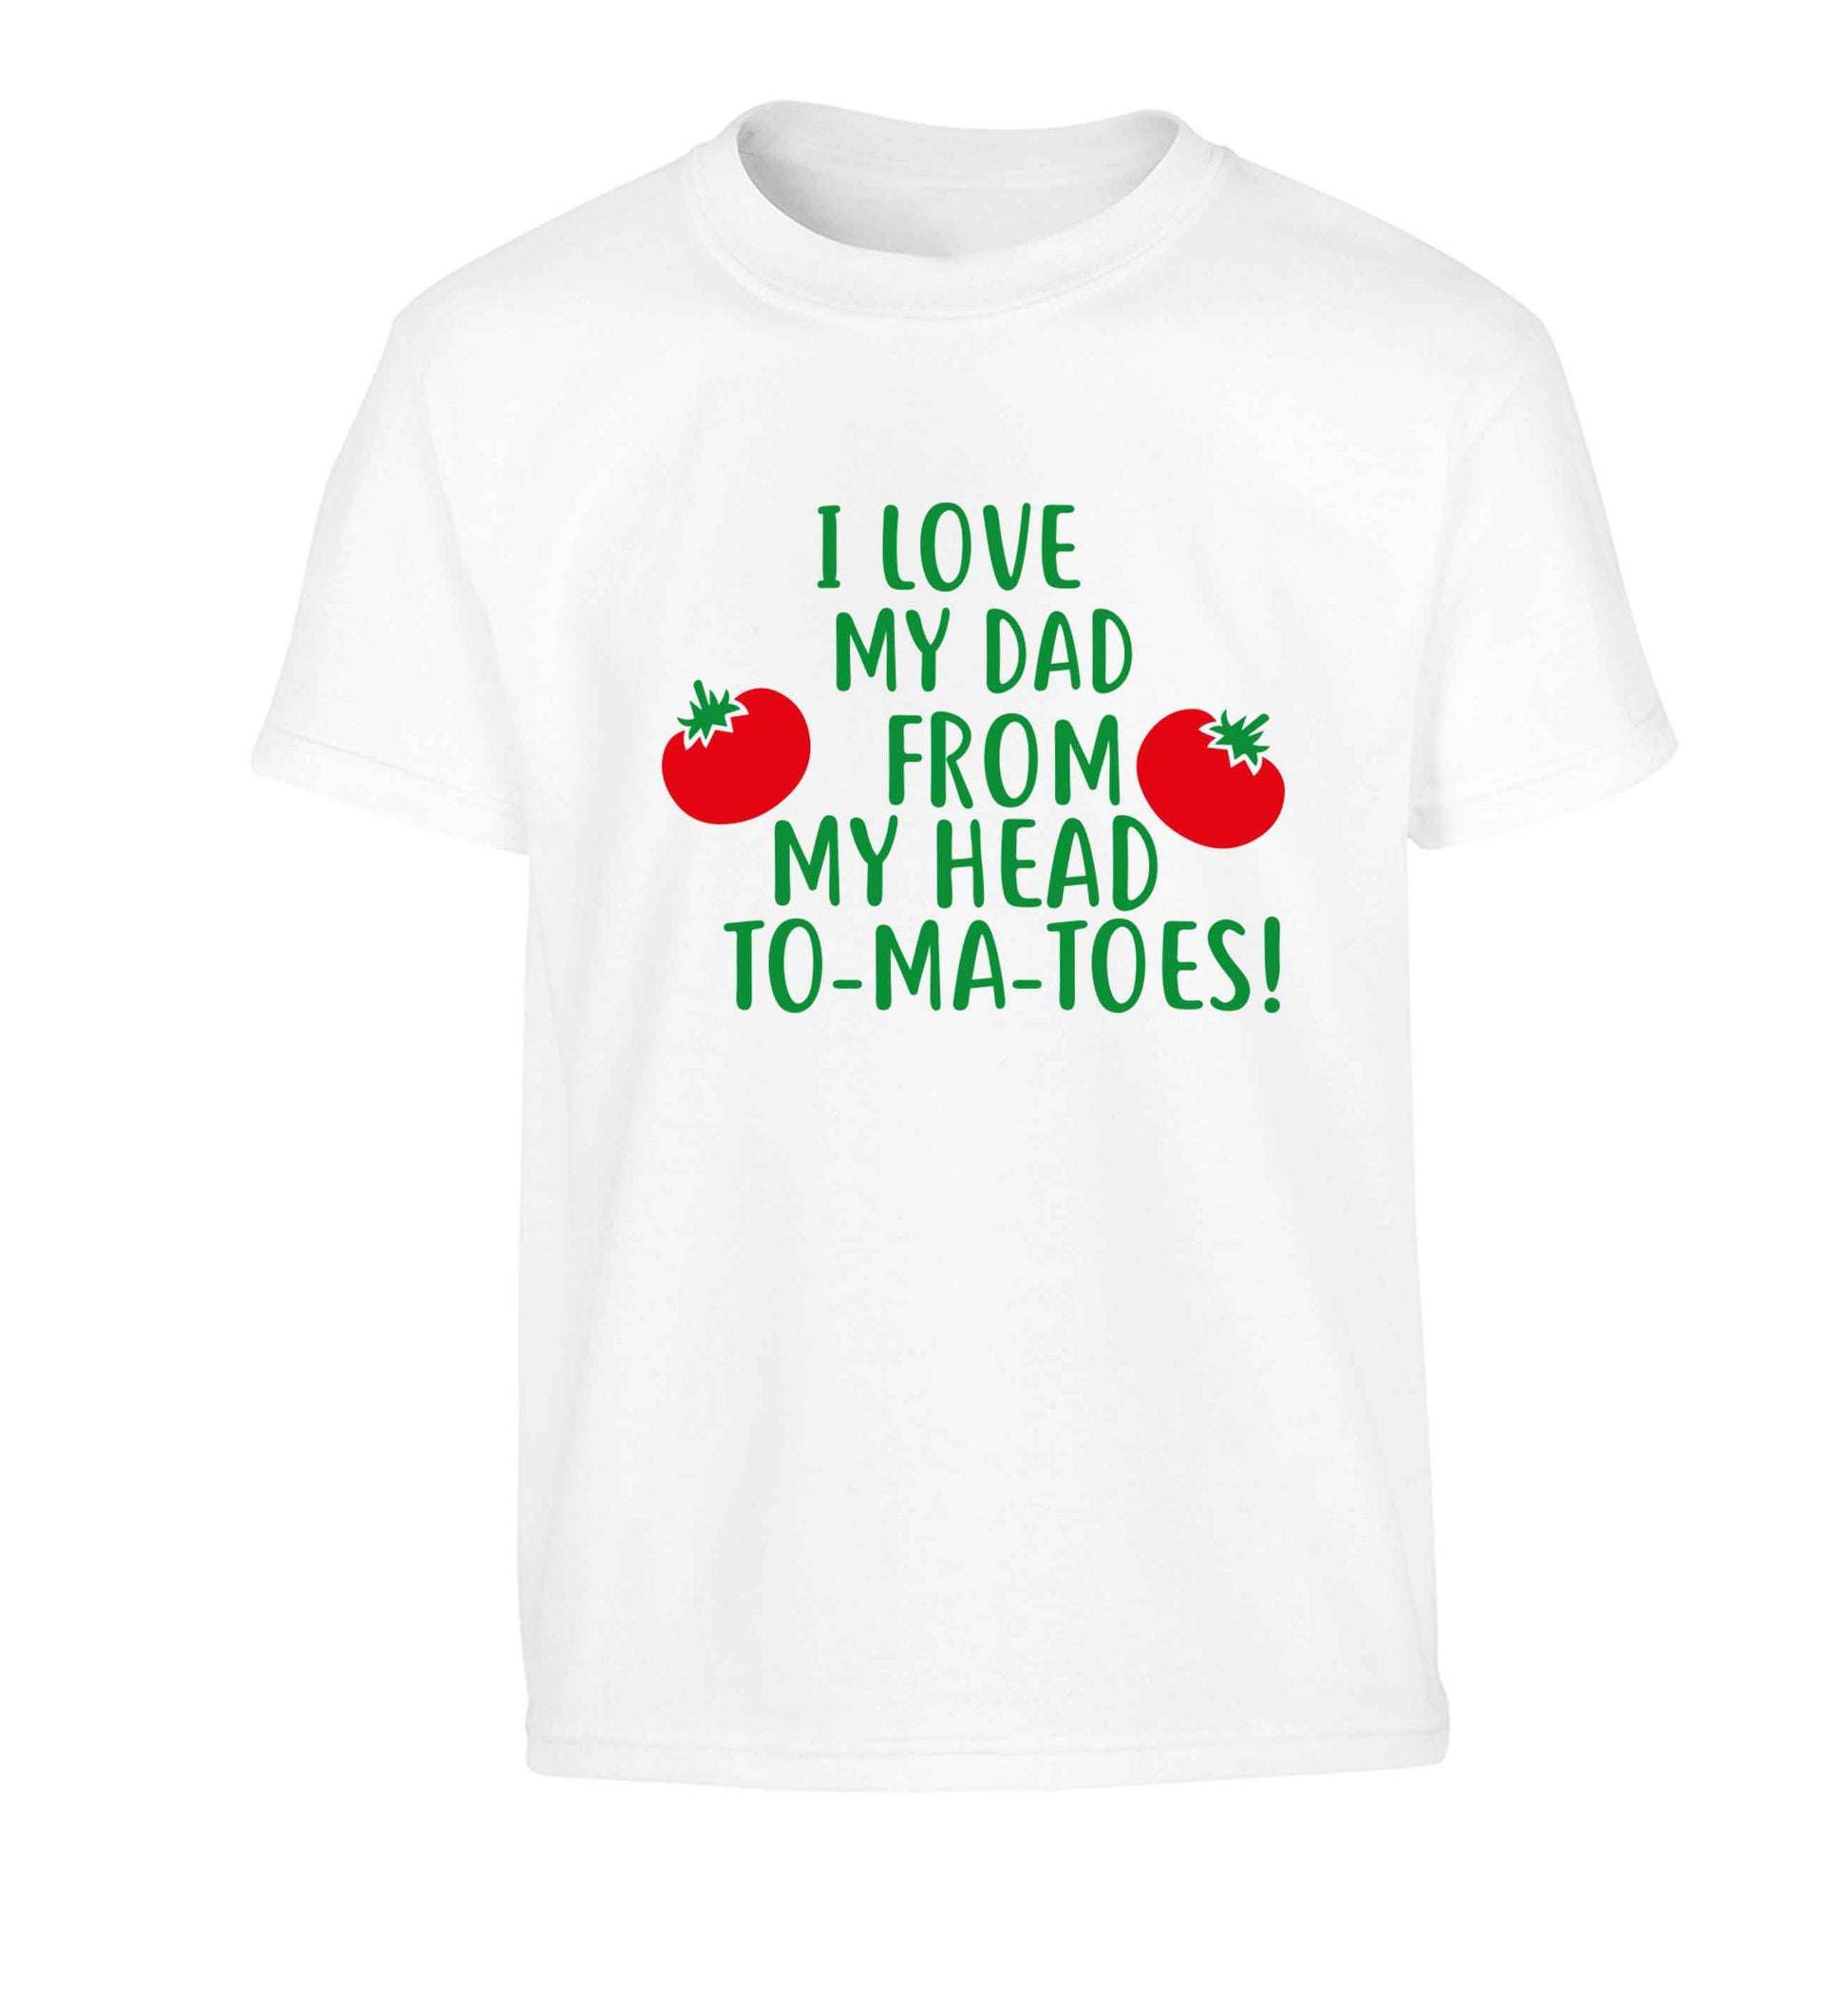 I love my dad from my head to-ma-toes Children's white Tshirt 12-13 Years